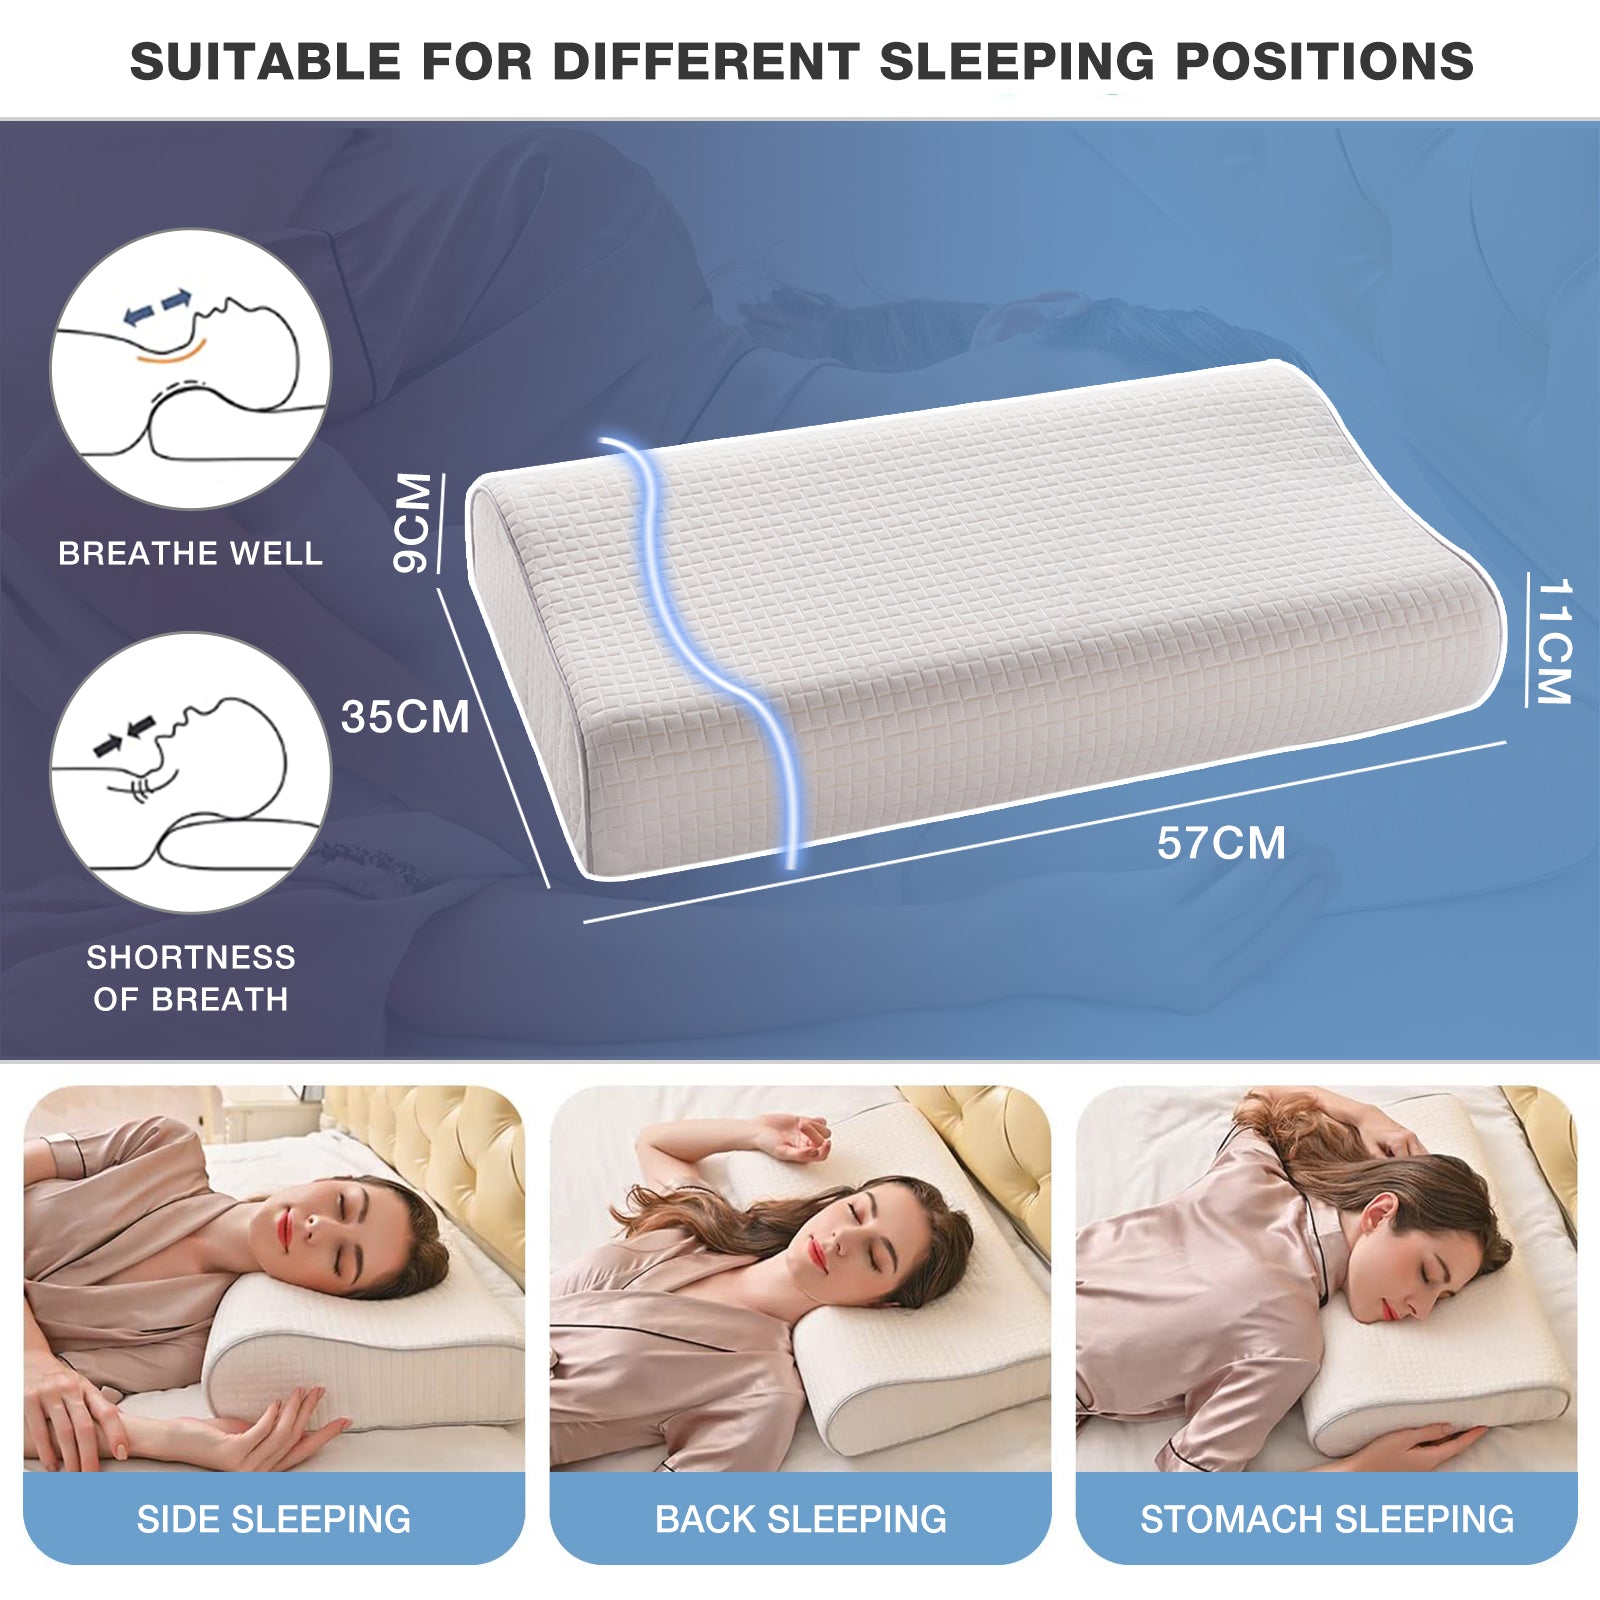 UlikTree Neck and Cervical Pillow Memory Foam Pillow for Neck and Shoulder Pain Relief Bed Sleeping Contoured Support Pillow for Side Sleepers, Back and Stomach Sleepers